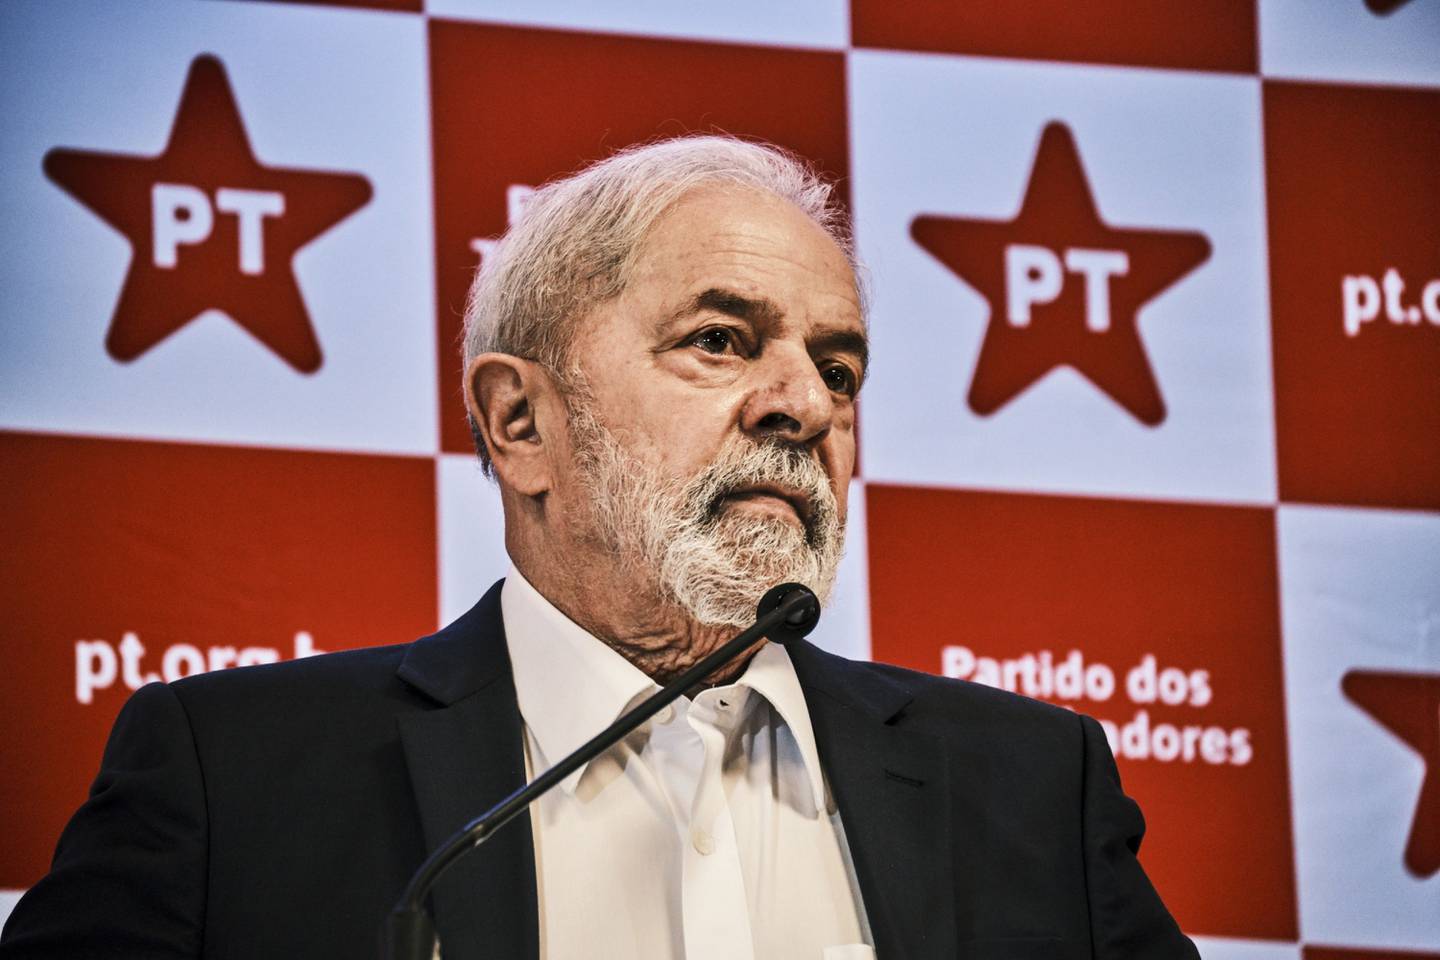 “We need to seriously rebuild Brazil,” Lula told reporters during an event in Sao Paulo.